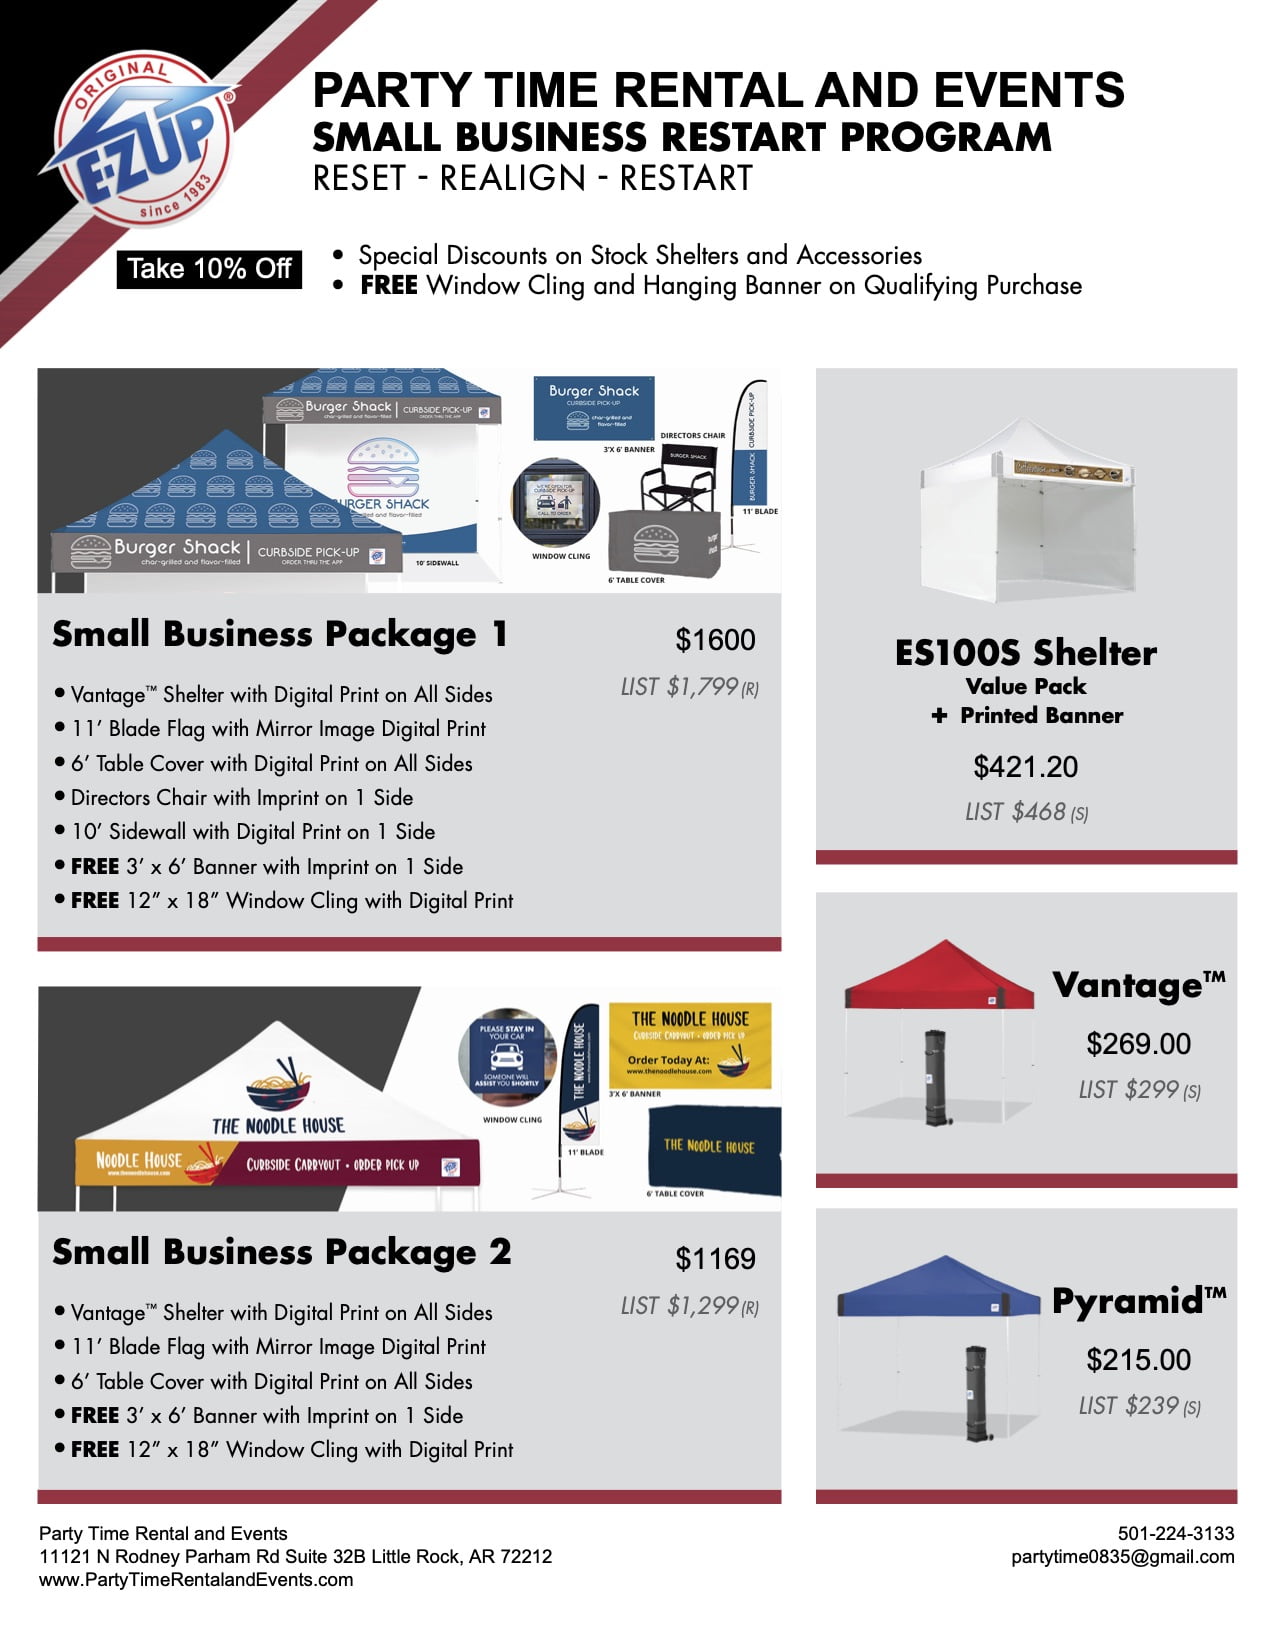 Small Business Restart Program by Party Time Rental and Events